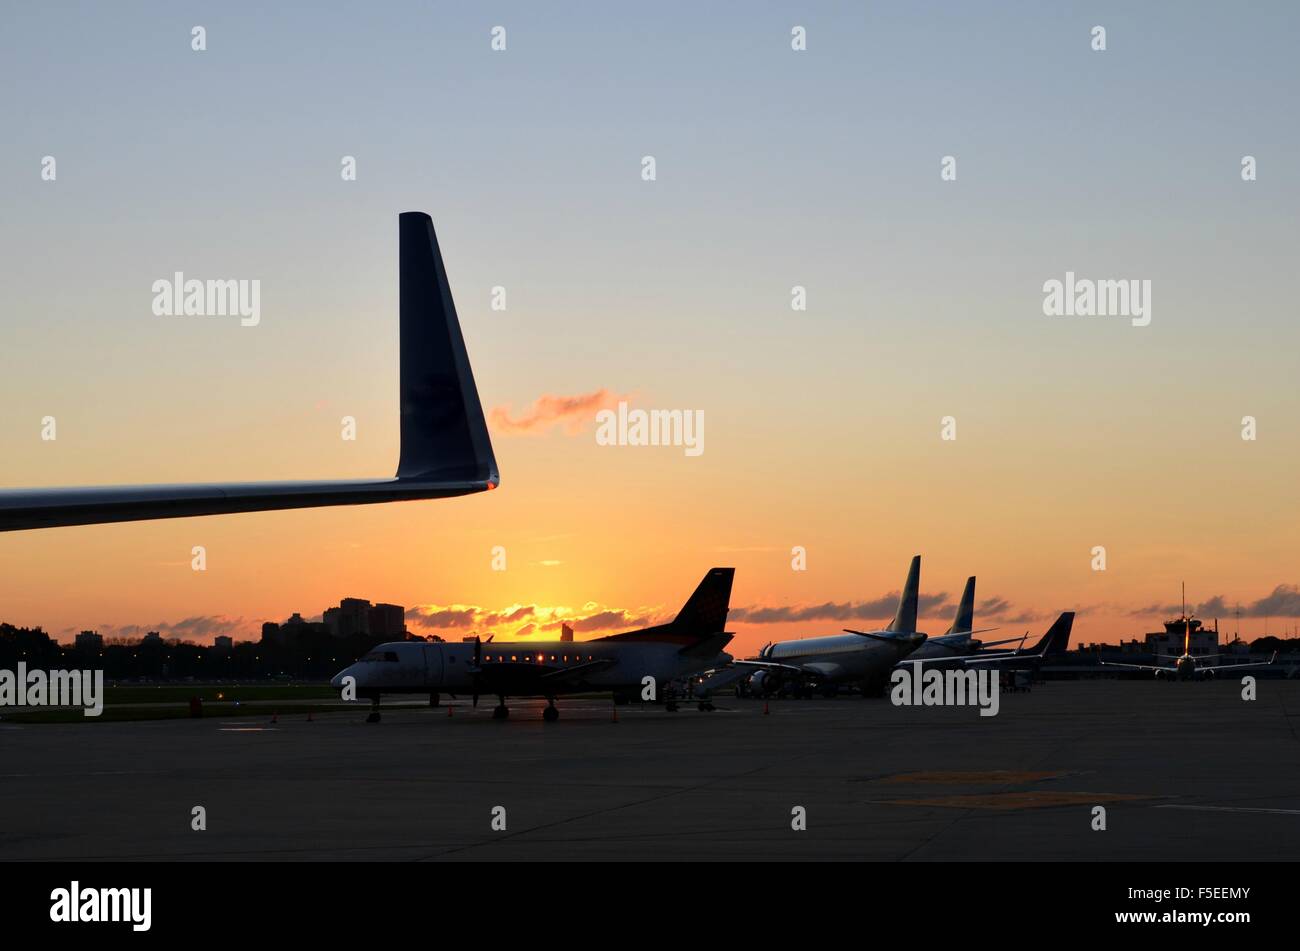 Airplanes in a row at the airport at sunset Stock Photo